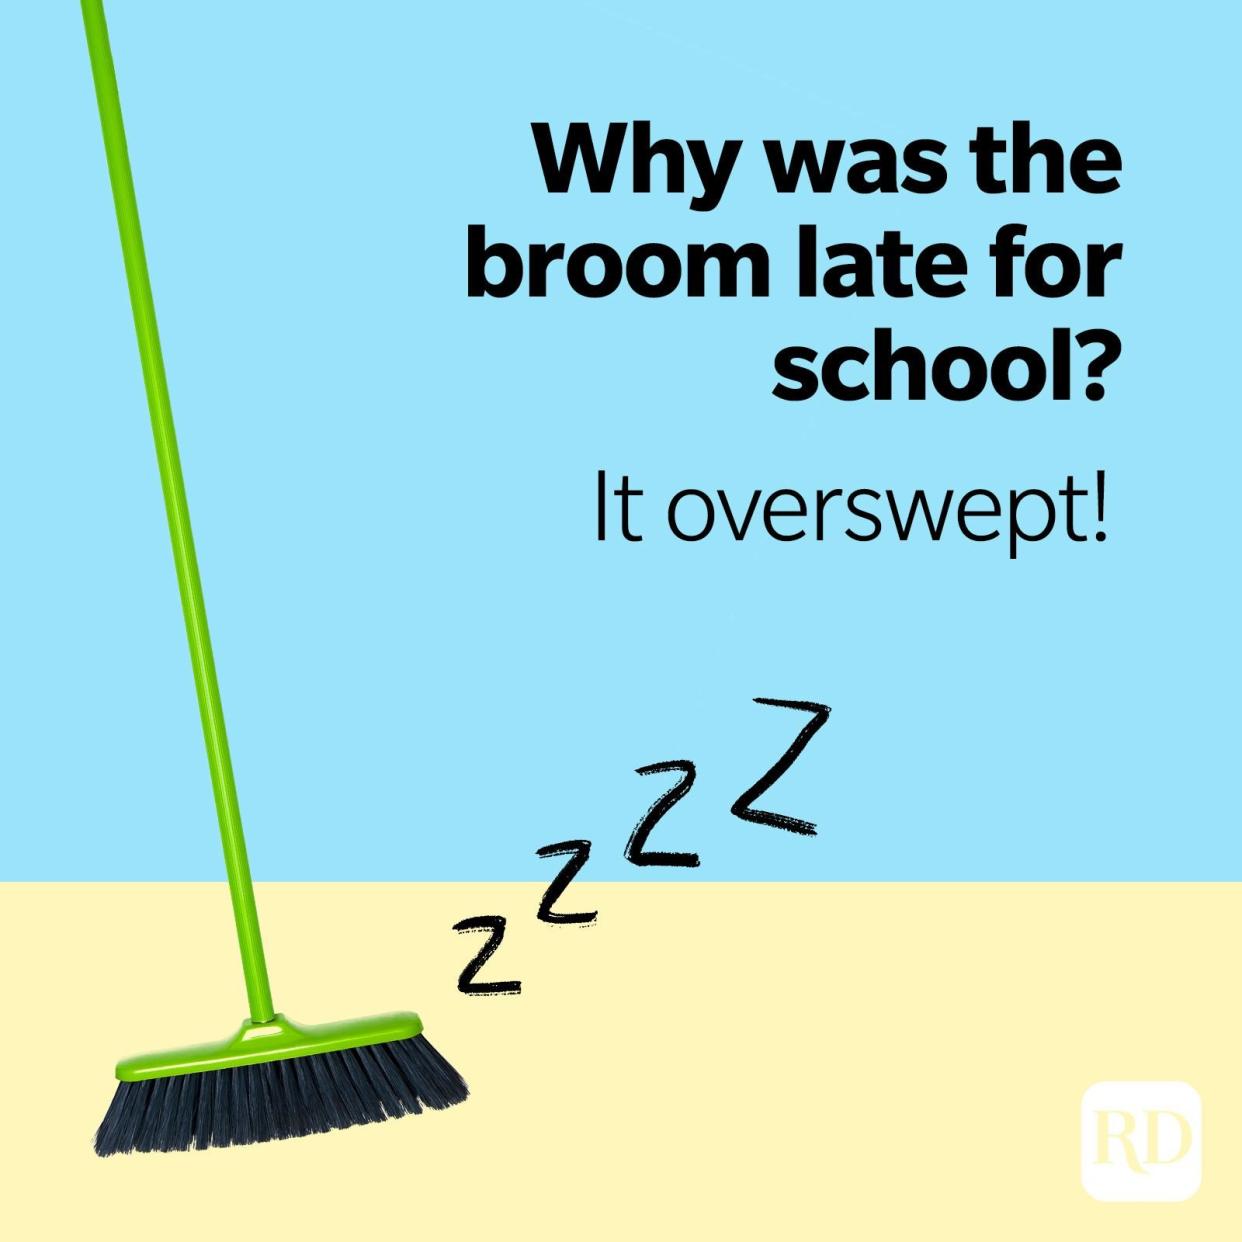 17. Why was the broom late for school? It overswept!